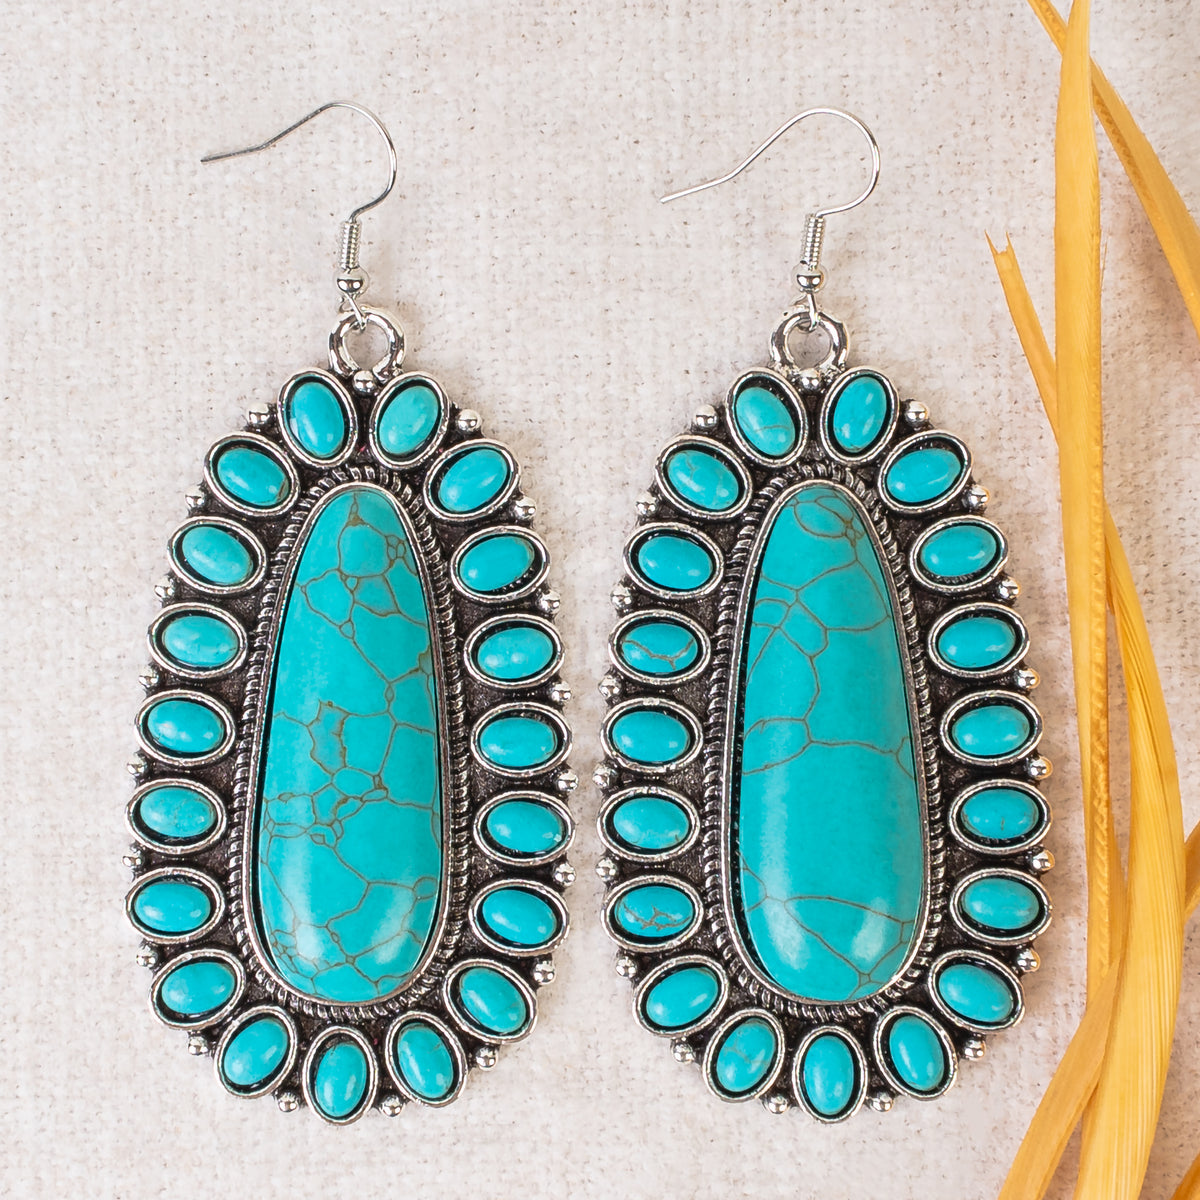 93273 - Squash Blossom Earrings - Turquoise & Silver